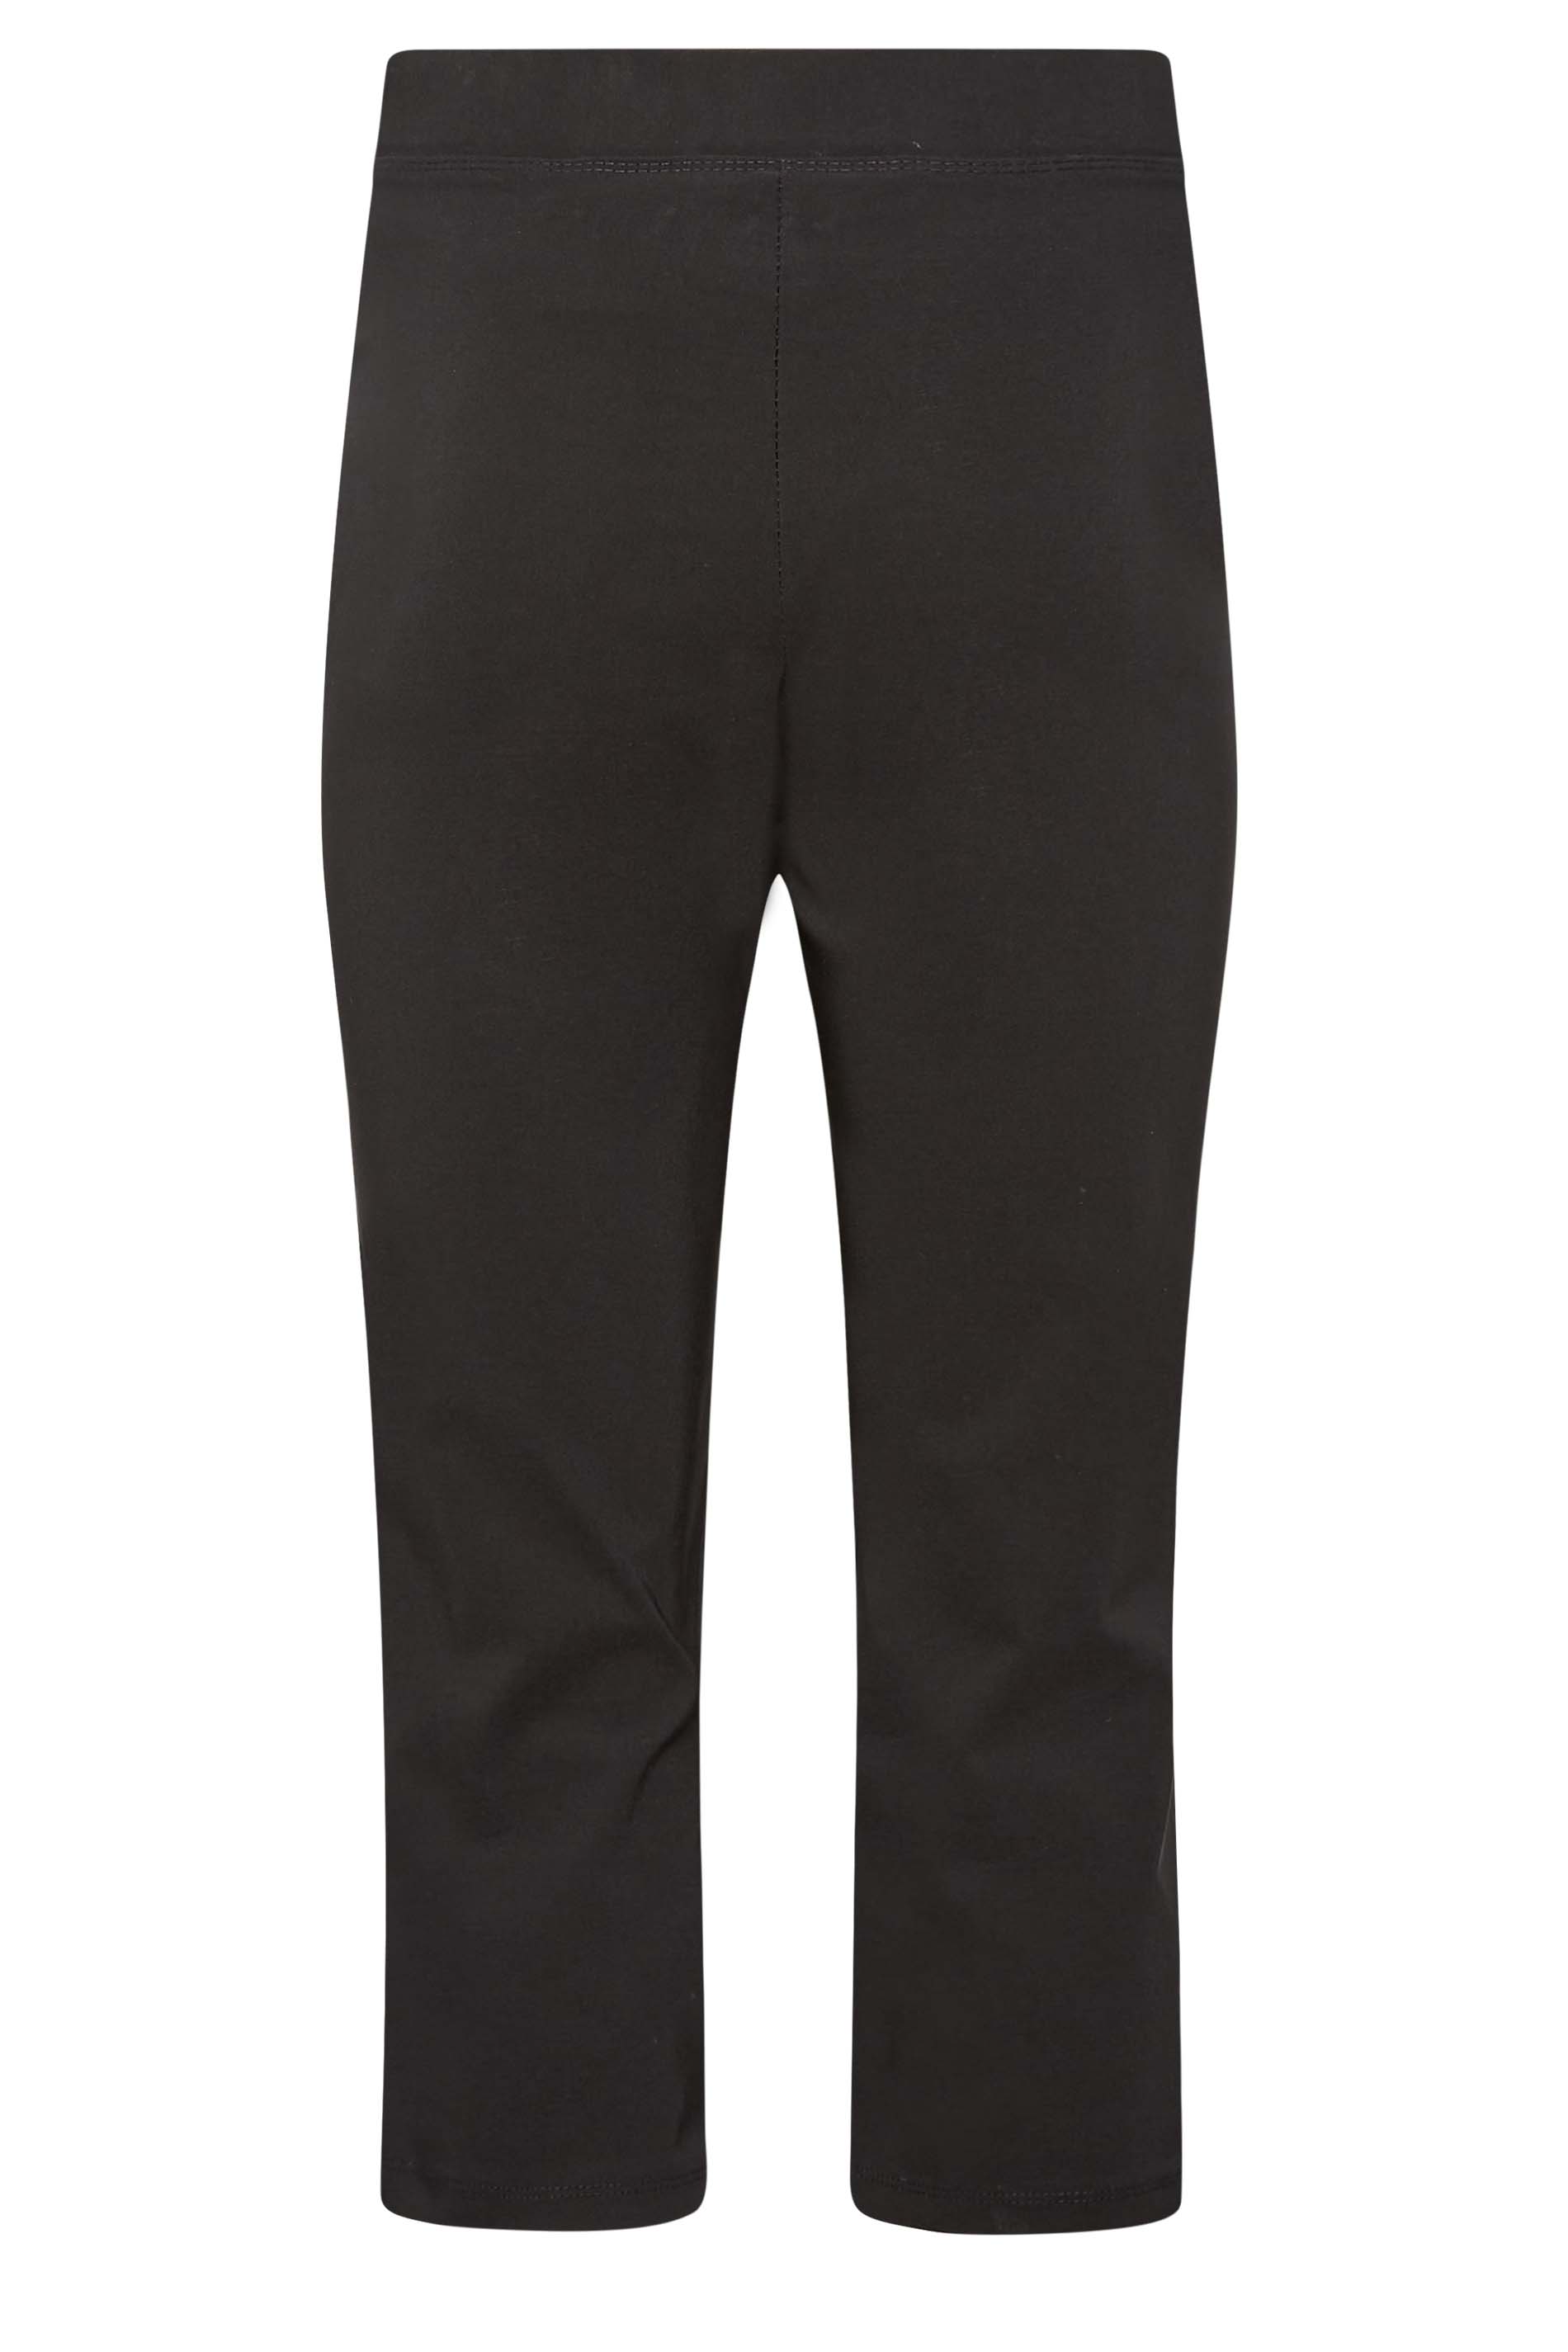 Stone Skinny Stretch Cropped Trousers | New Look